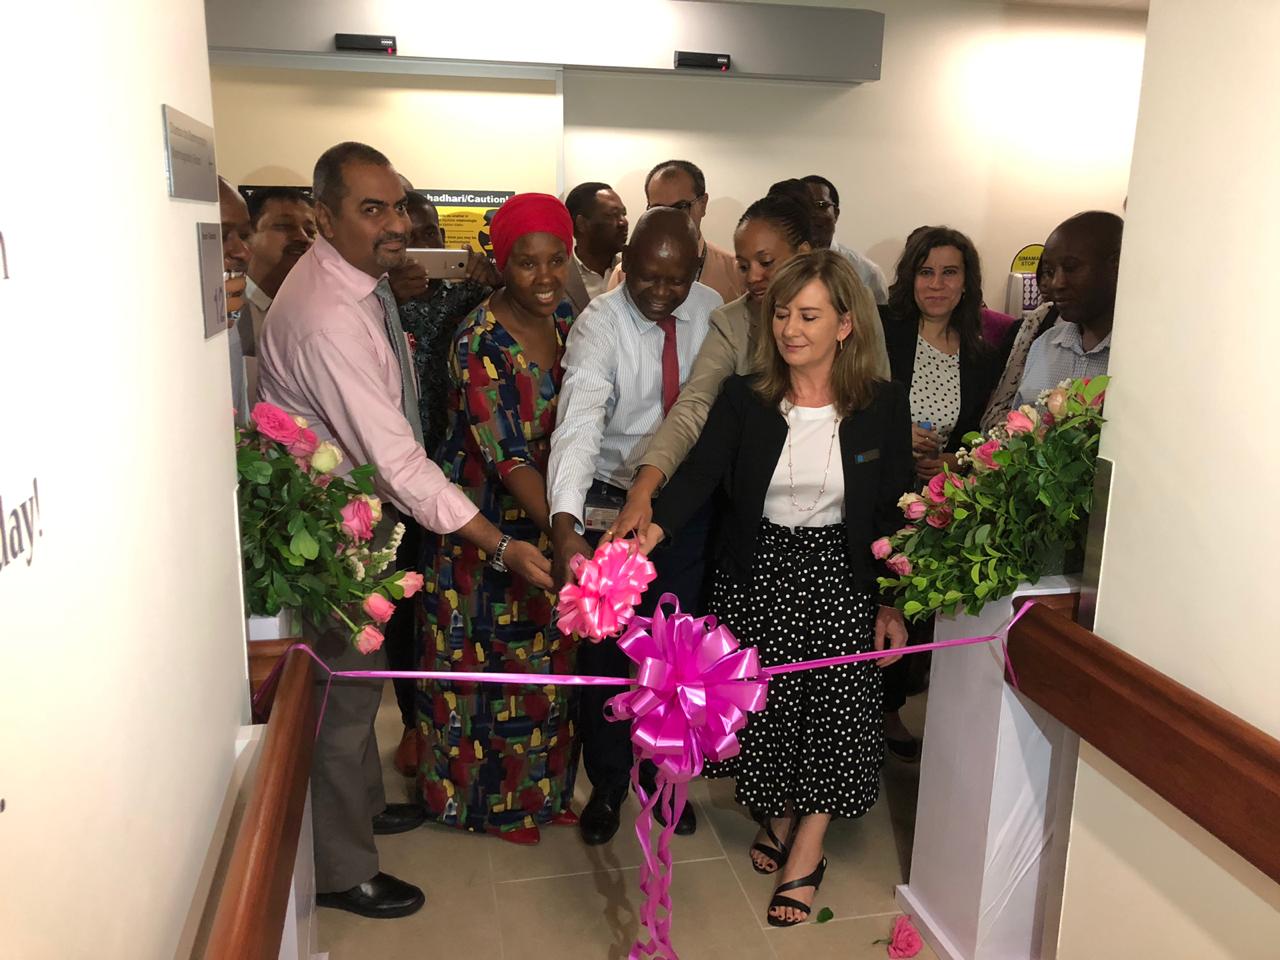 Chief guest Dr. Daisy Majamba, Regional Dental Officer, Dar es Salaam with Mr. Sulaiman Shahabuddin, Regional Chief Executive Officer, Aga Khan Health Services, East Africa and Maria Smith, Marketing Director for Women’s Health at GE Healthcare Africa during the launch of the Digital Mammography